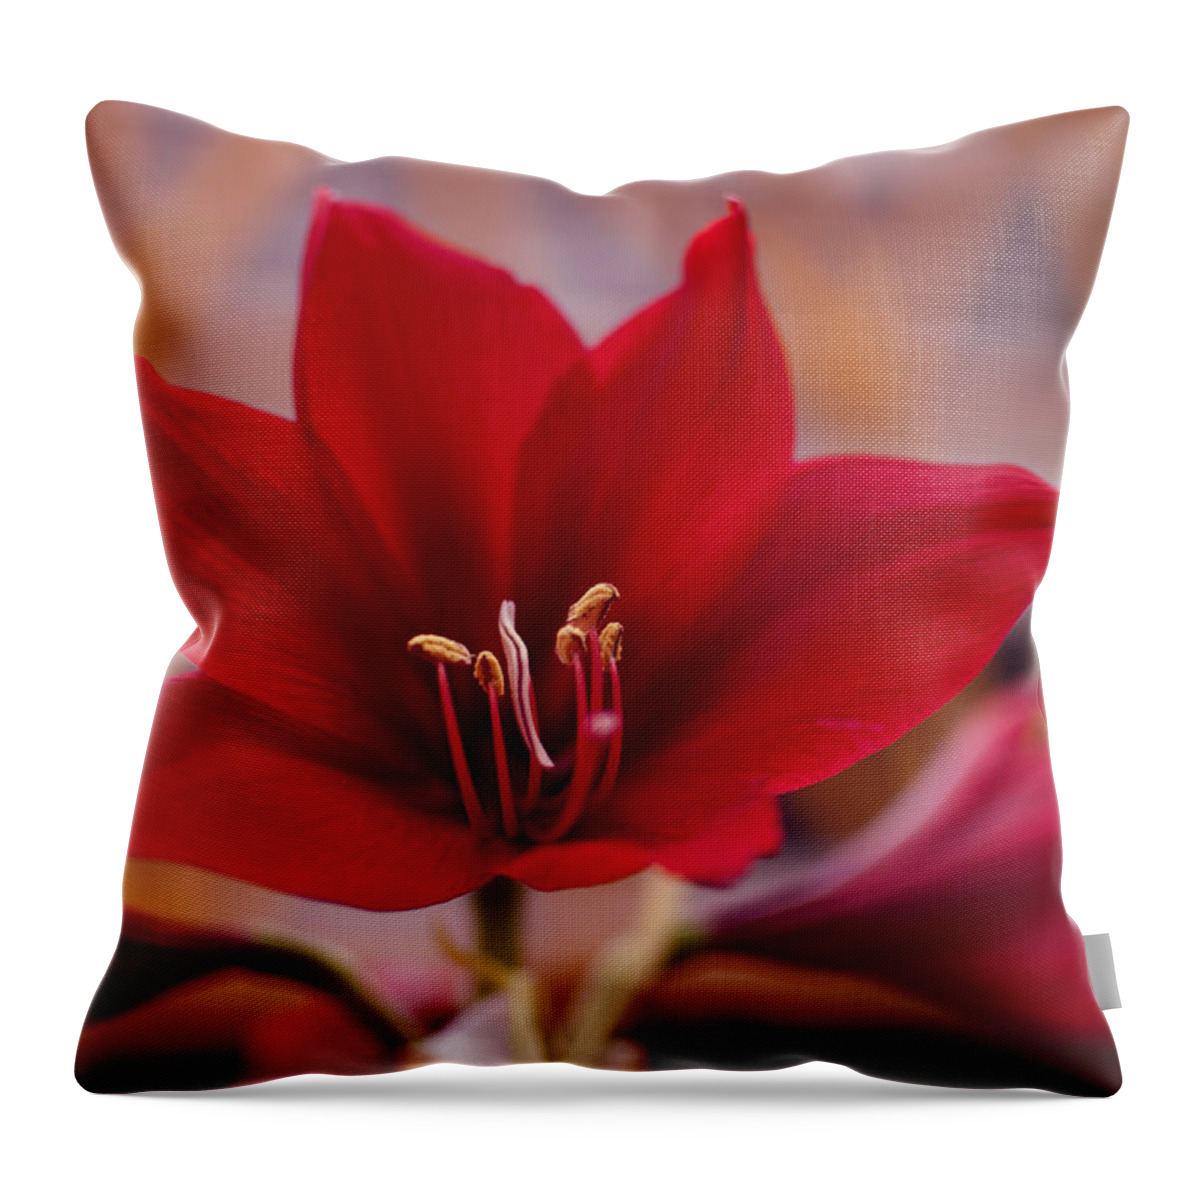 Tropical Throw Pillow featuring the photograph Content Tropics by Miguel Winterpacht